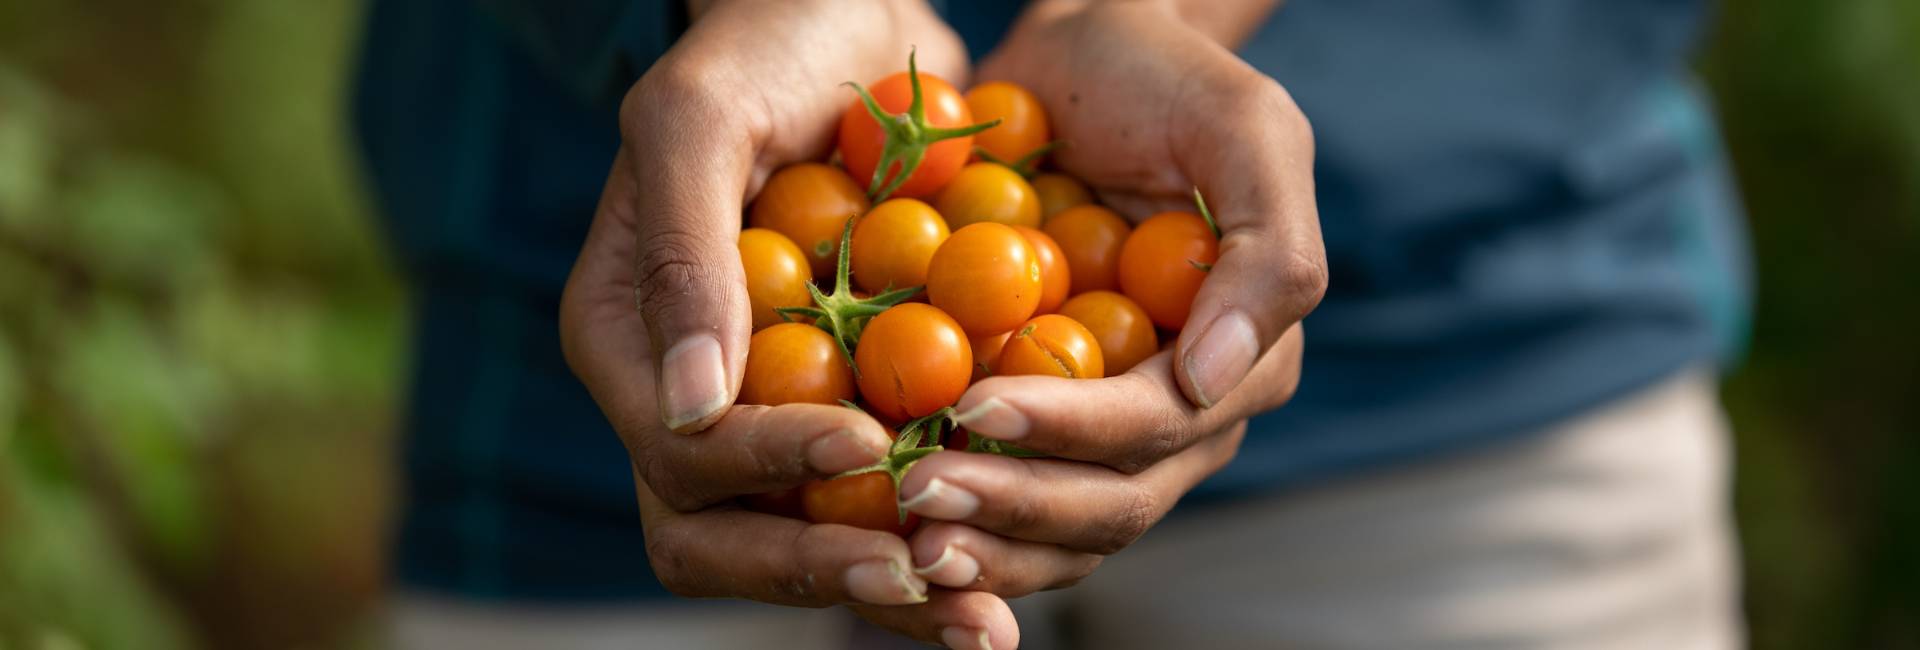 hands holding cherry tomatoes from the field station market